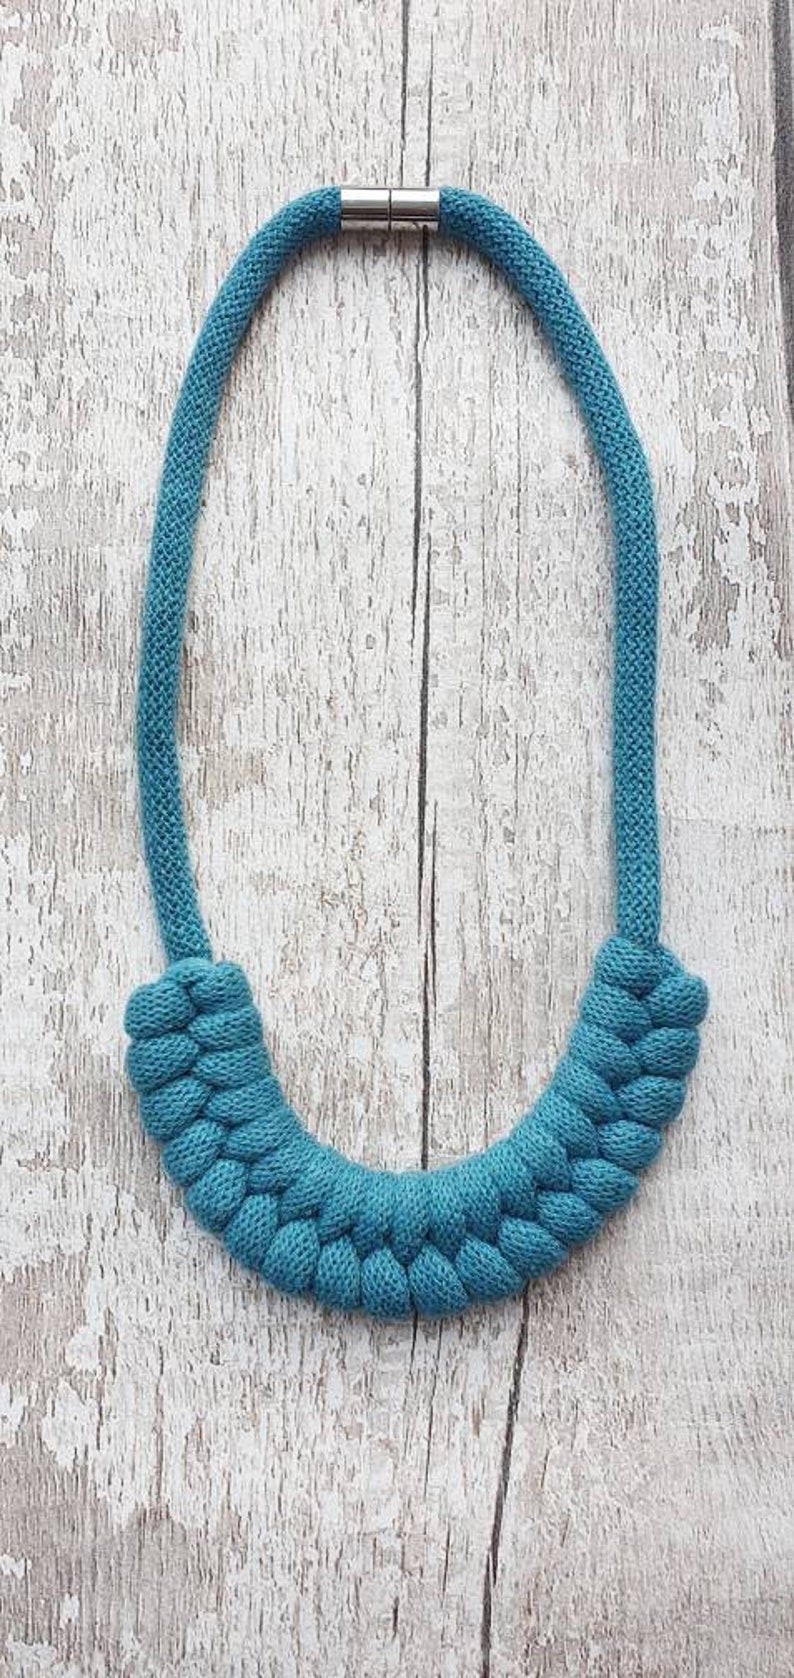 sustainable fashion magnet fastening cotton cord jewellery quirky statement piece Teal colour Jayne style knotted macrame necklace